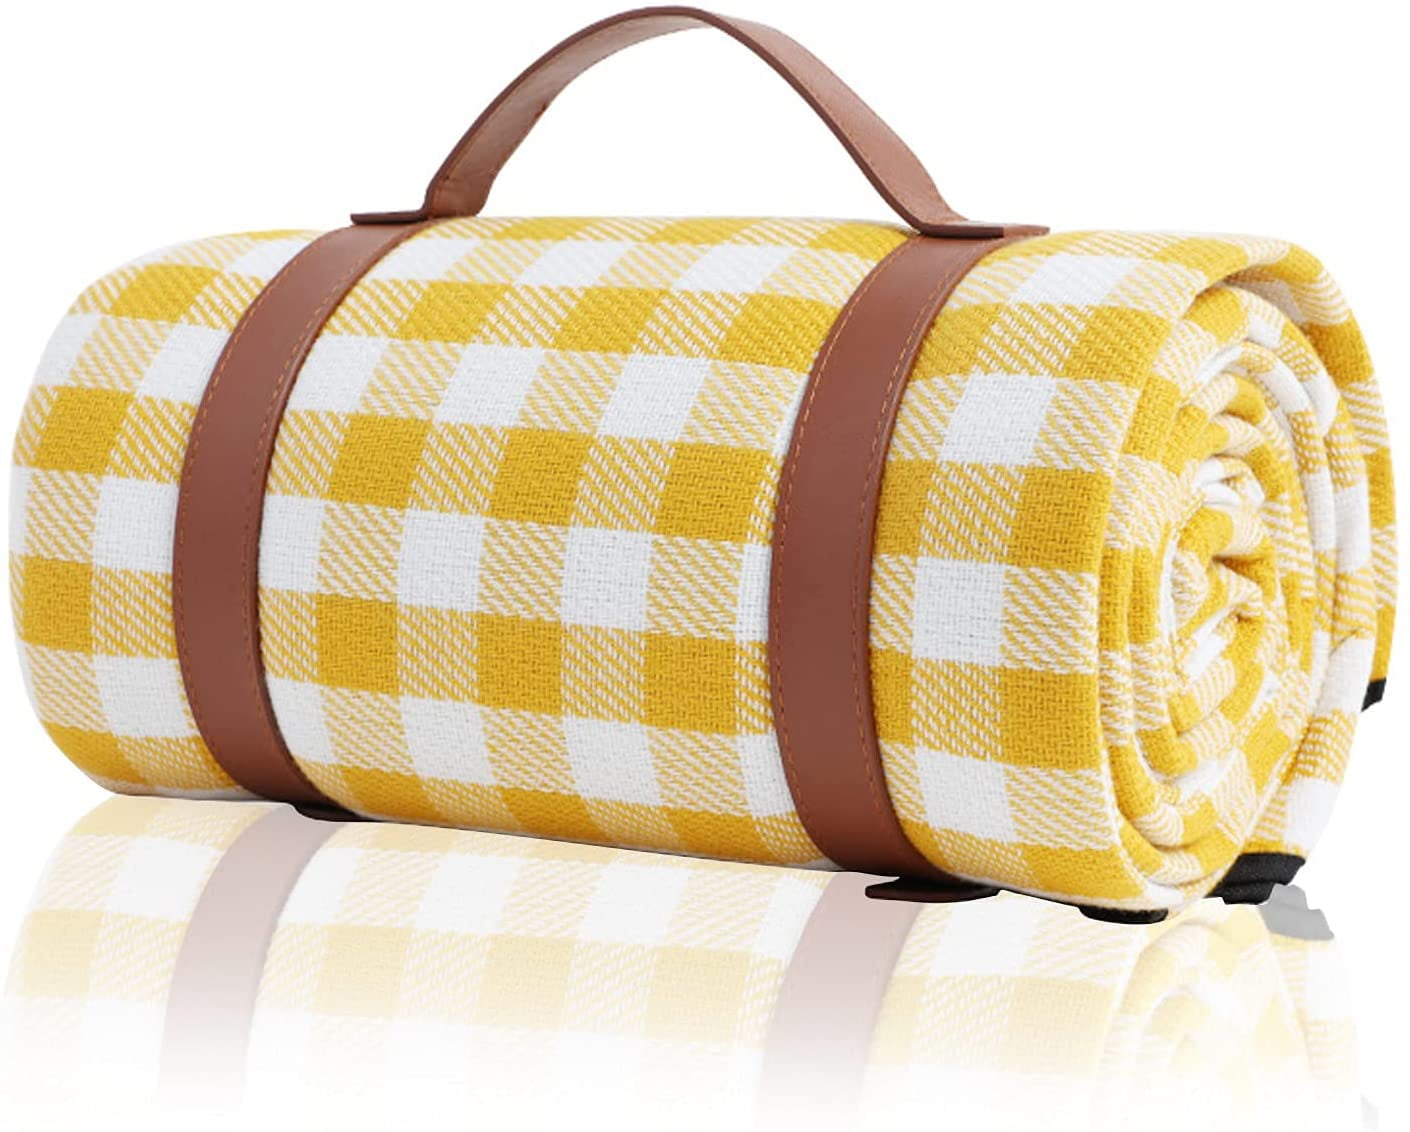 Extra Large Picnic & Outdoor Blanket Family with Waterproof Backing 200 x 150 cm 